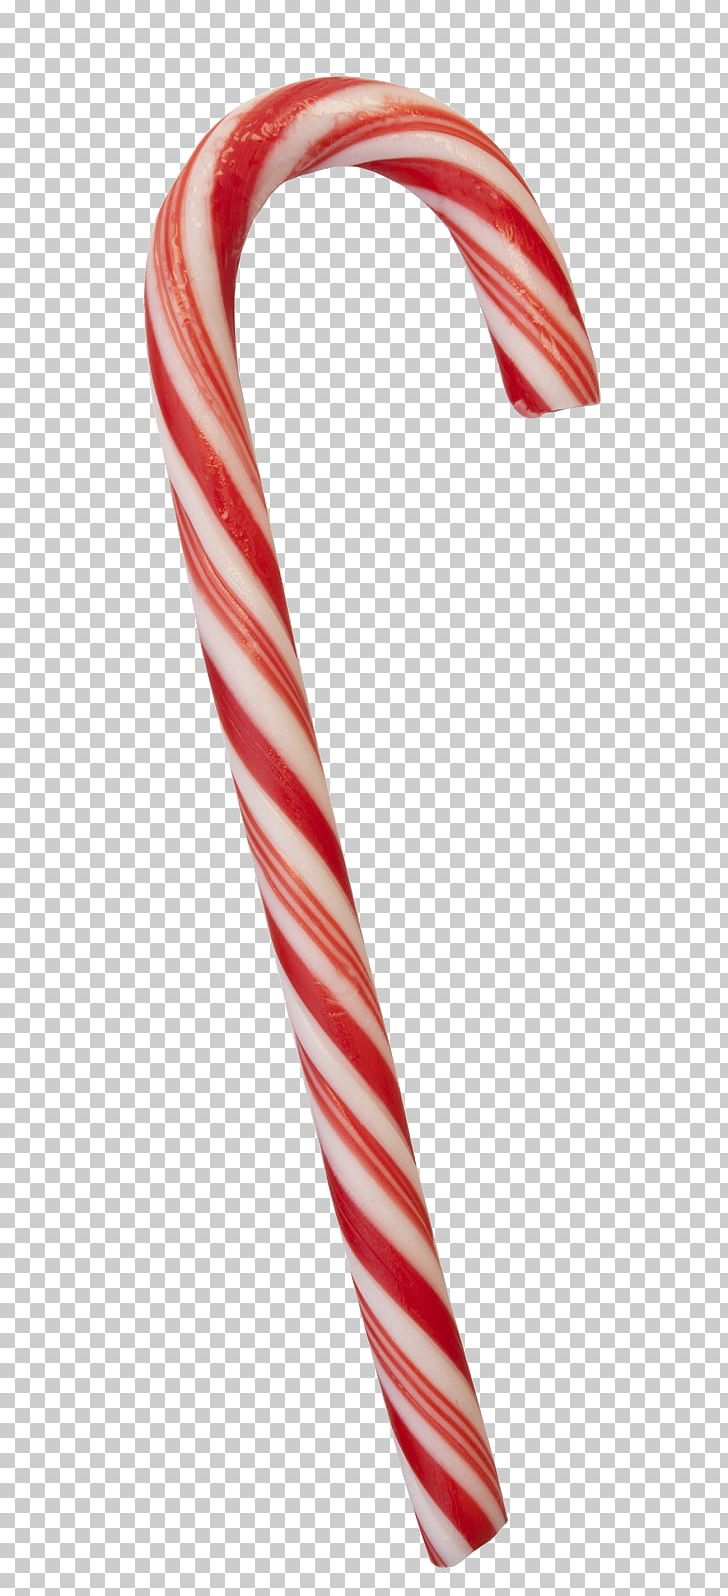 Candy Cane Christmas PNG, Clipart, Art Christmas, Candy, Candy Cane, Caramel, Christmas Free PNG Download